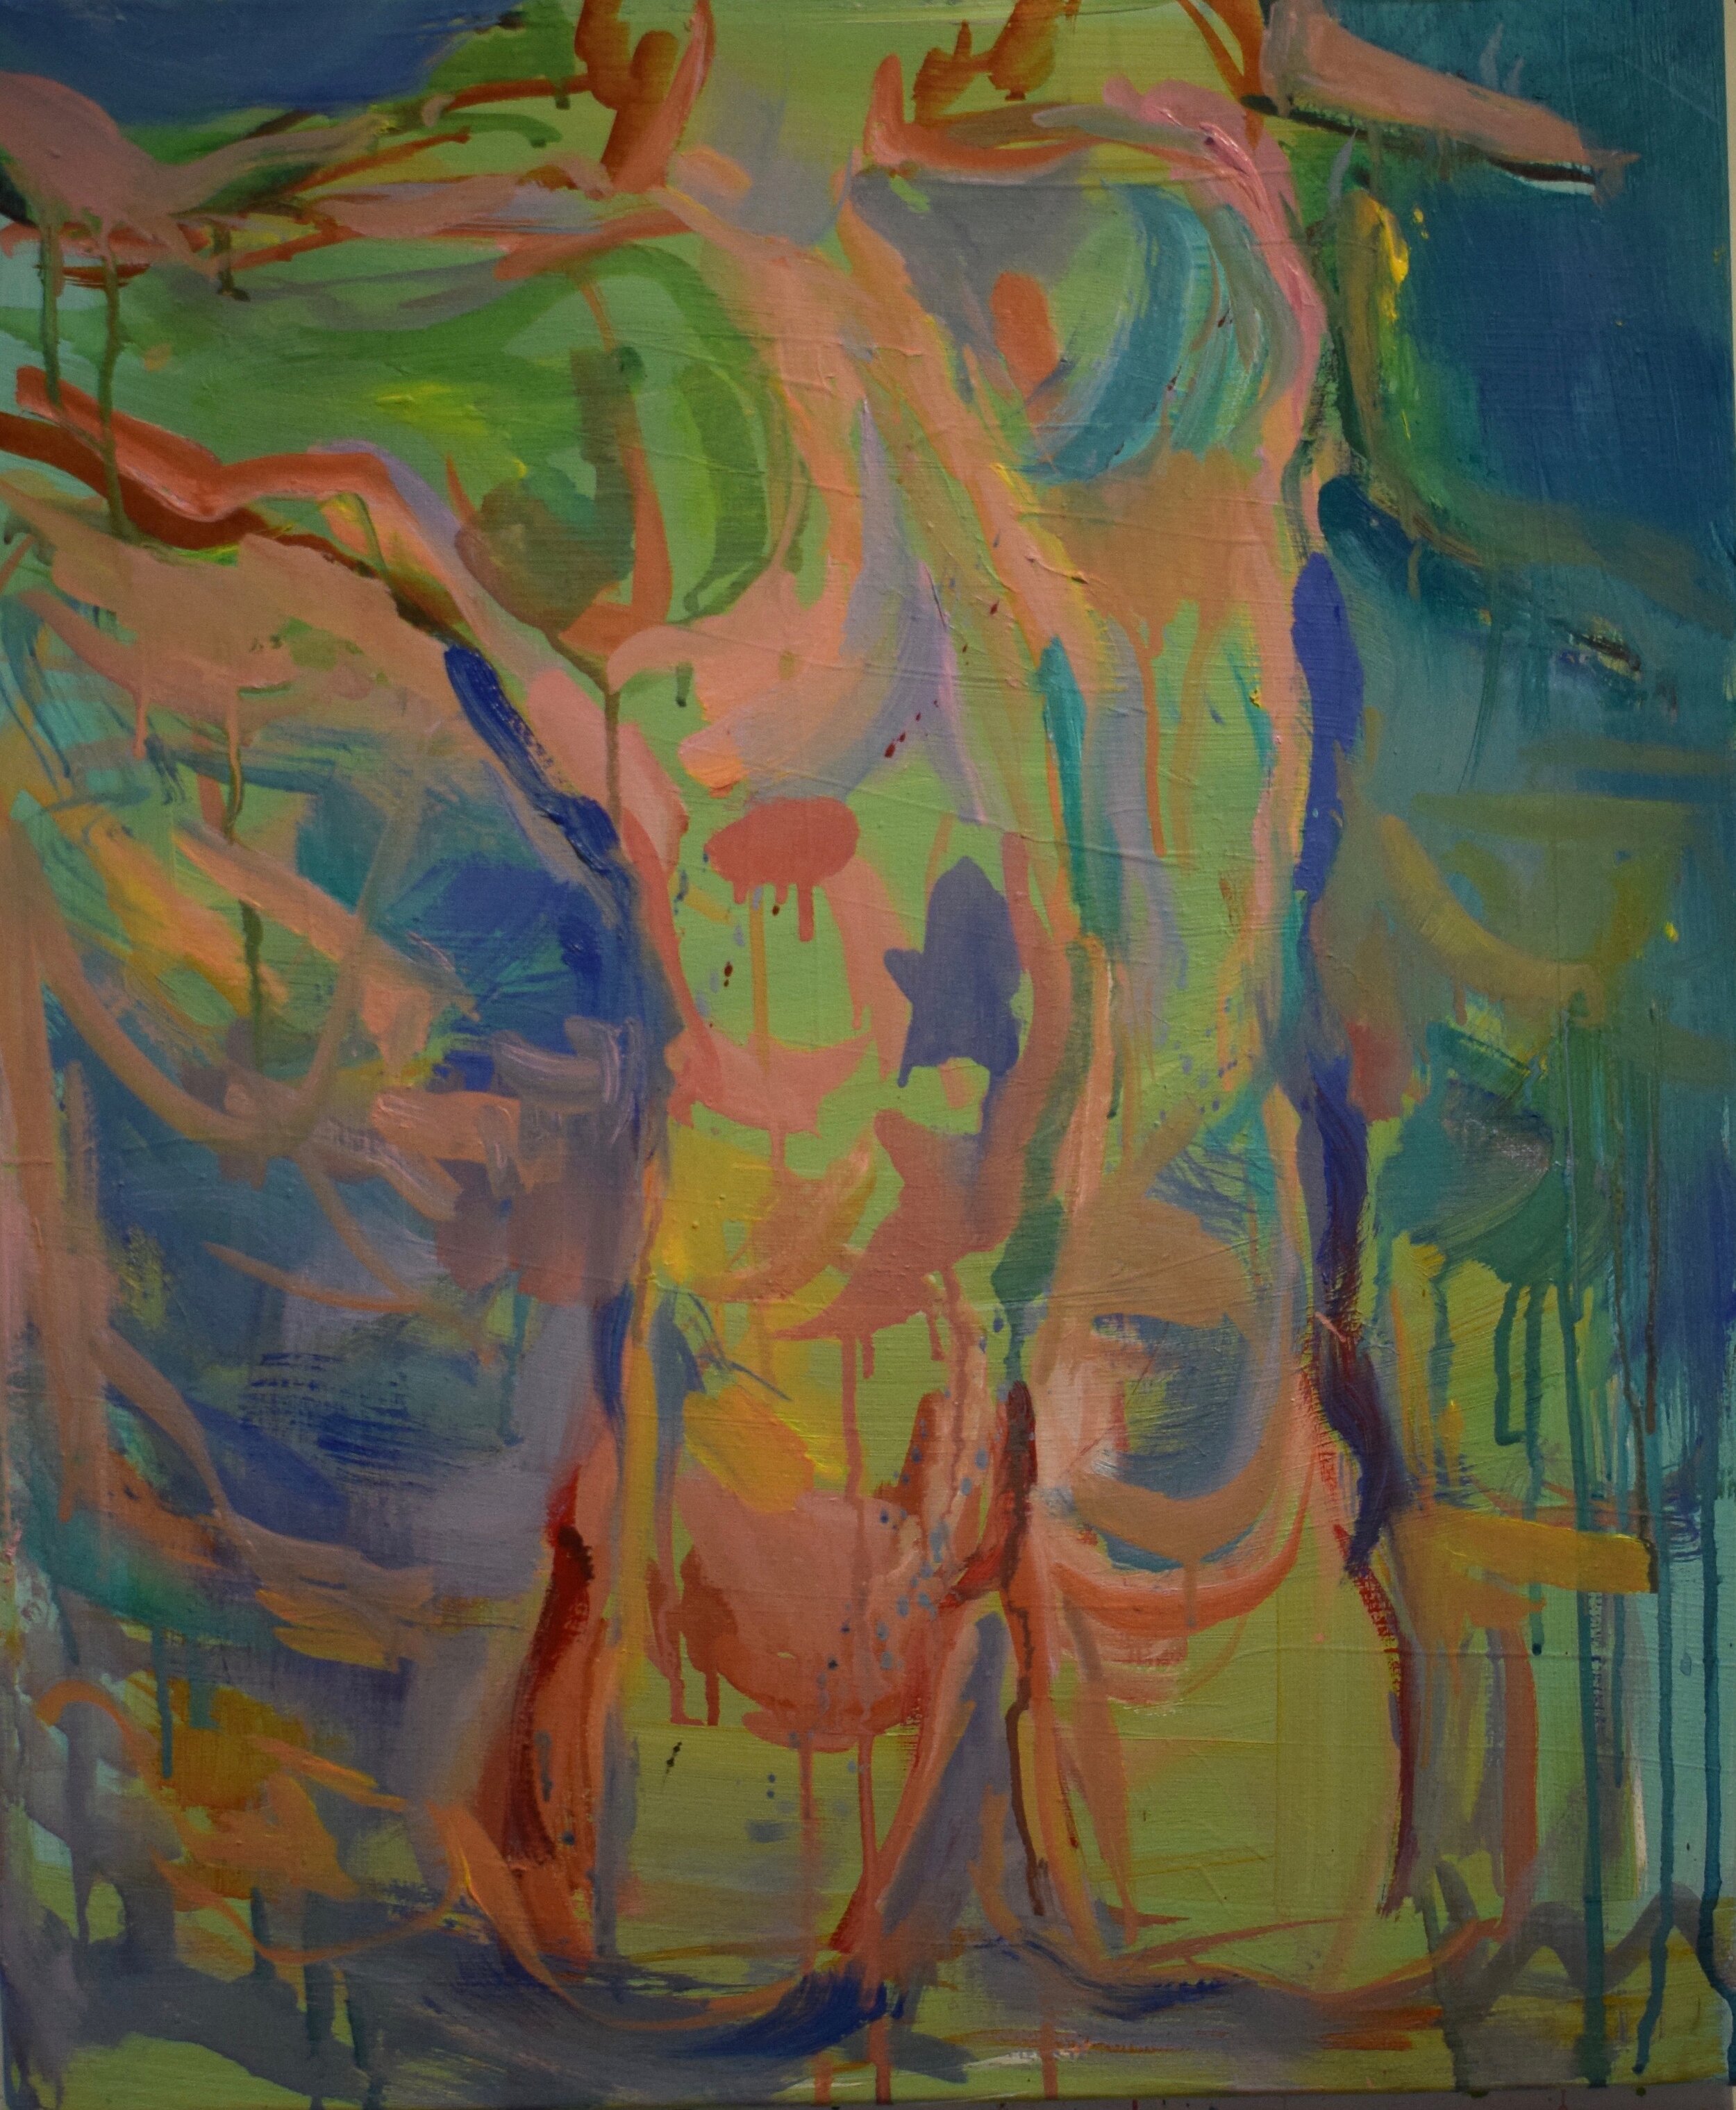 SOLD Bather II, oil on canvas, 2021, 85 x 64 cm